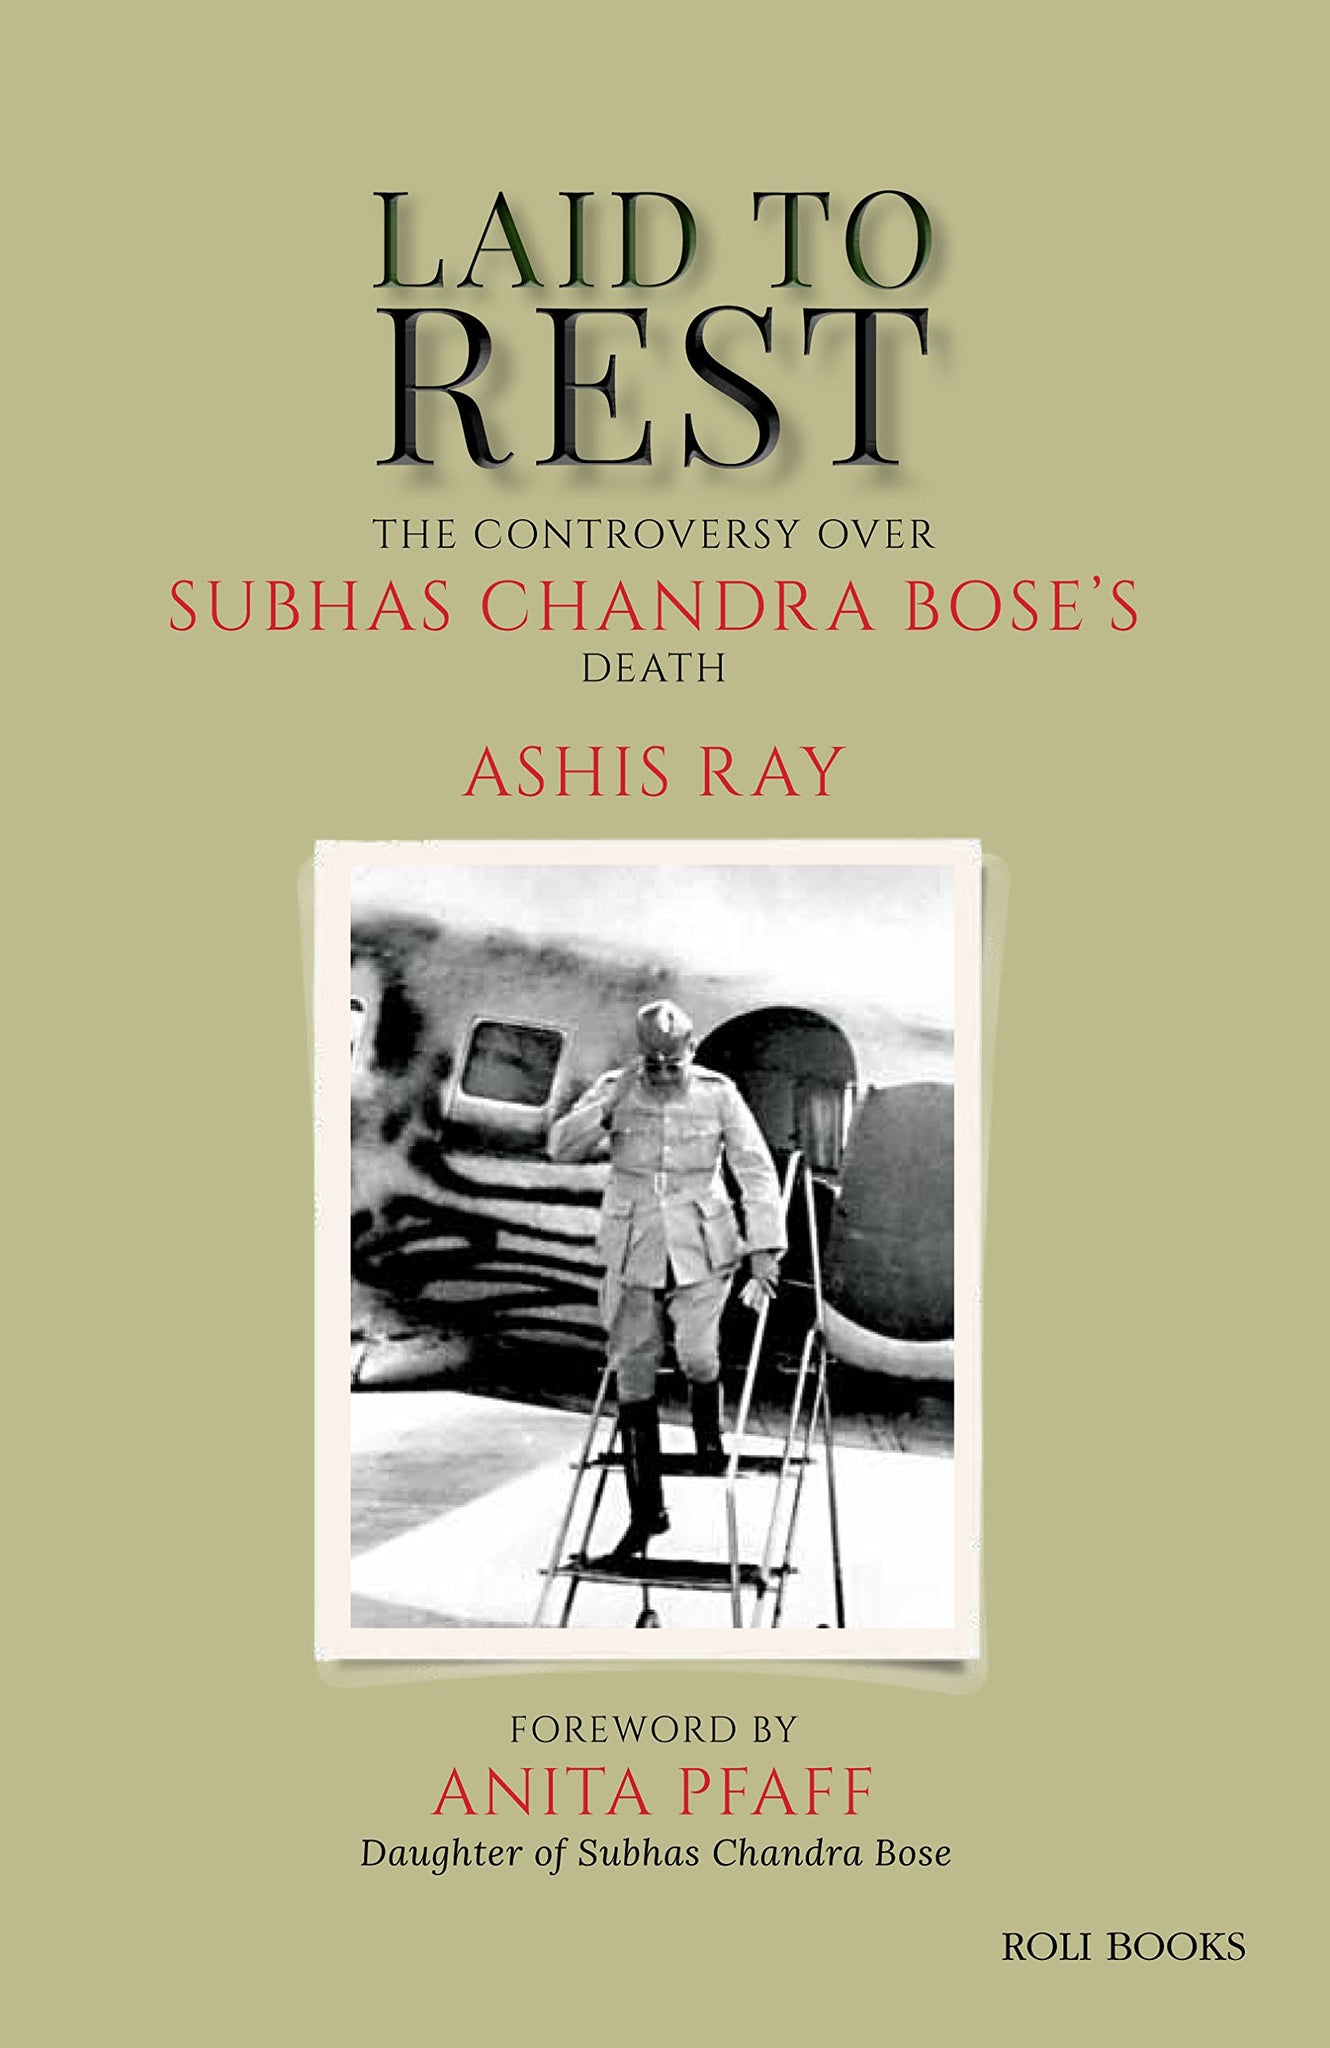 Laid To Rest: The Controversy Over Subhas Chandra